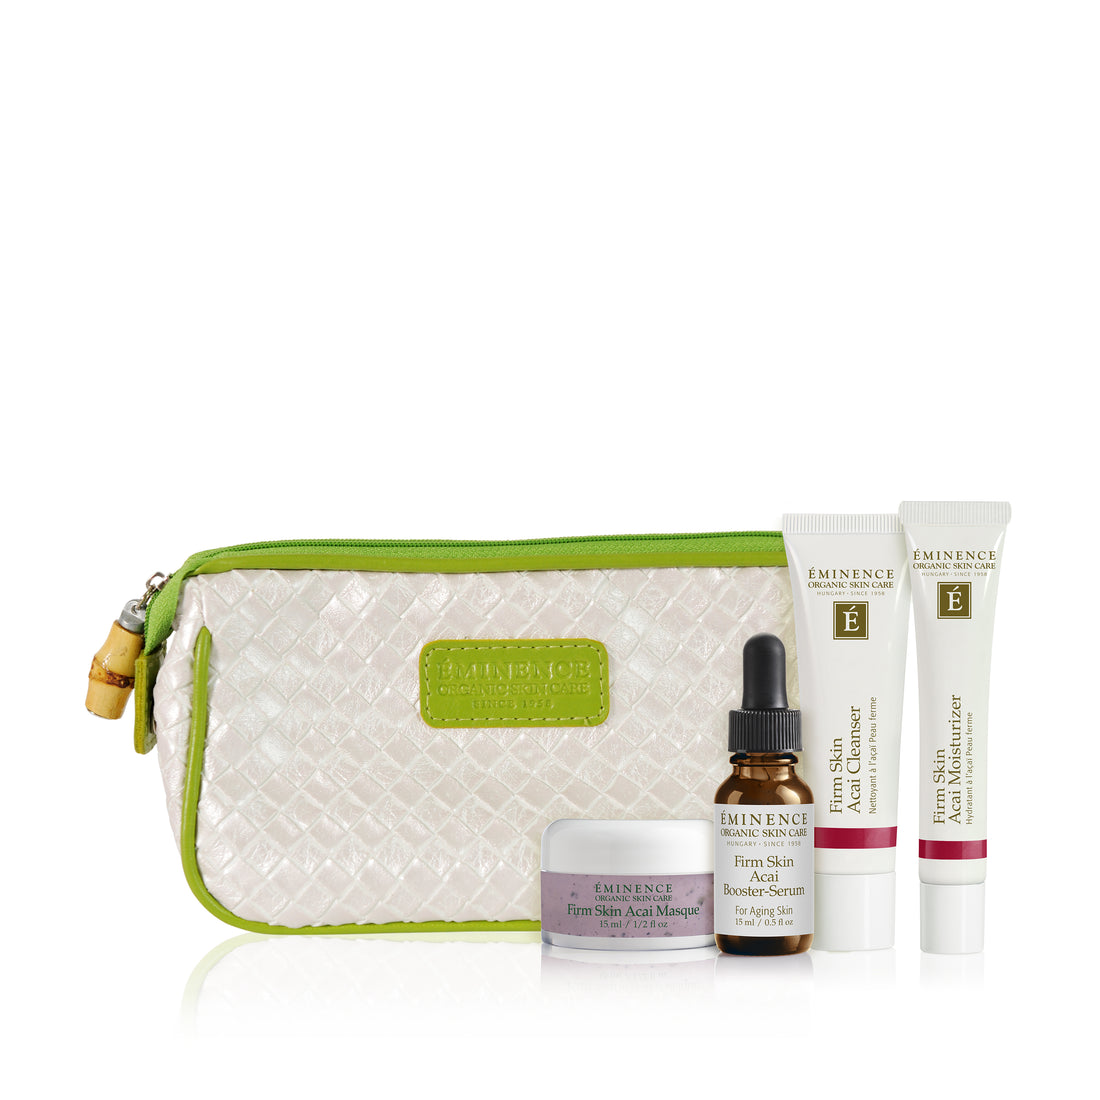 Firm Skin Starter Set| Reduce the look of aging skin